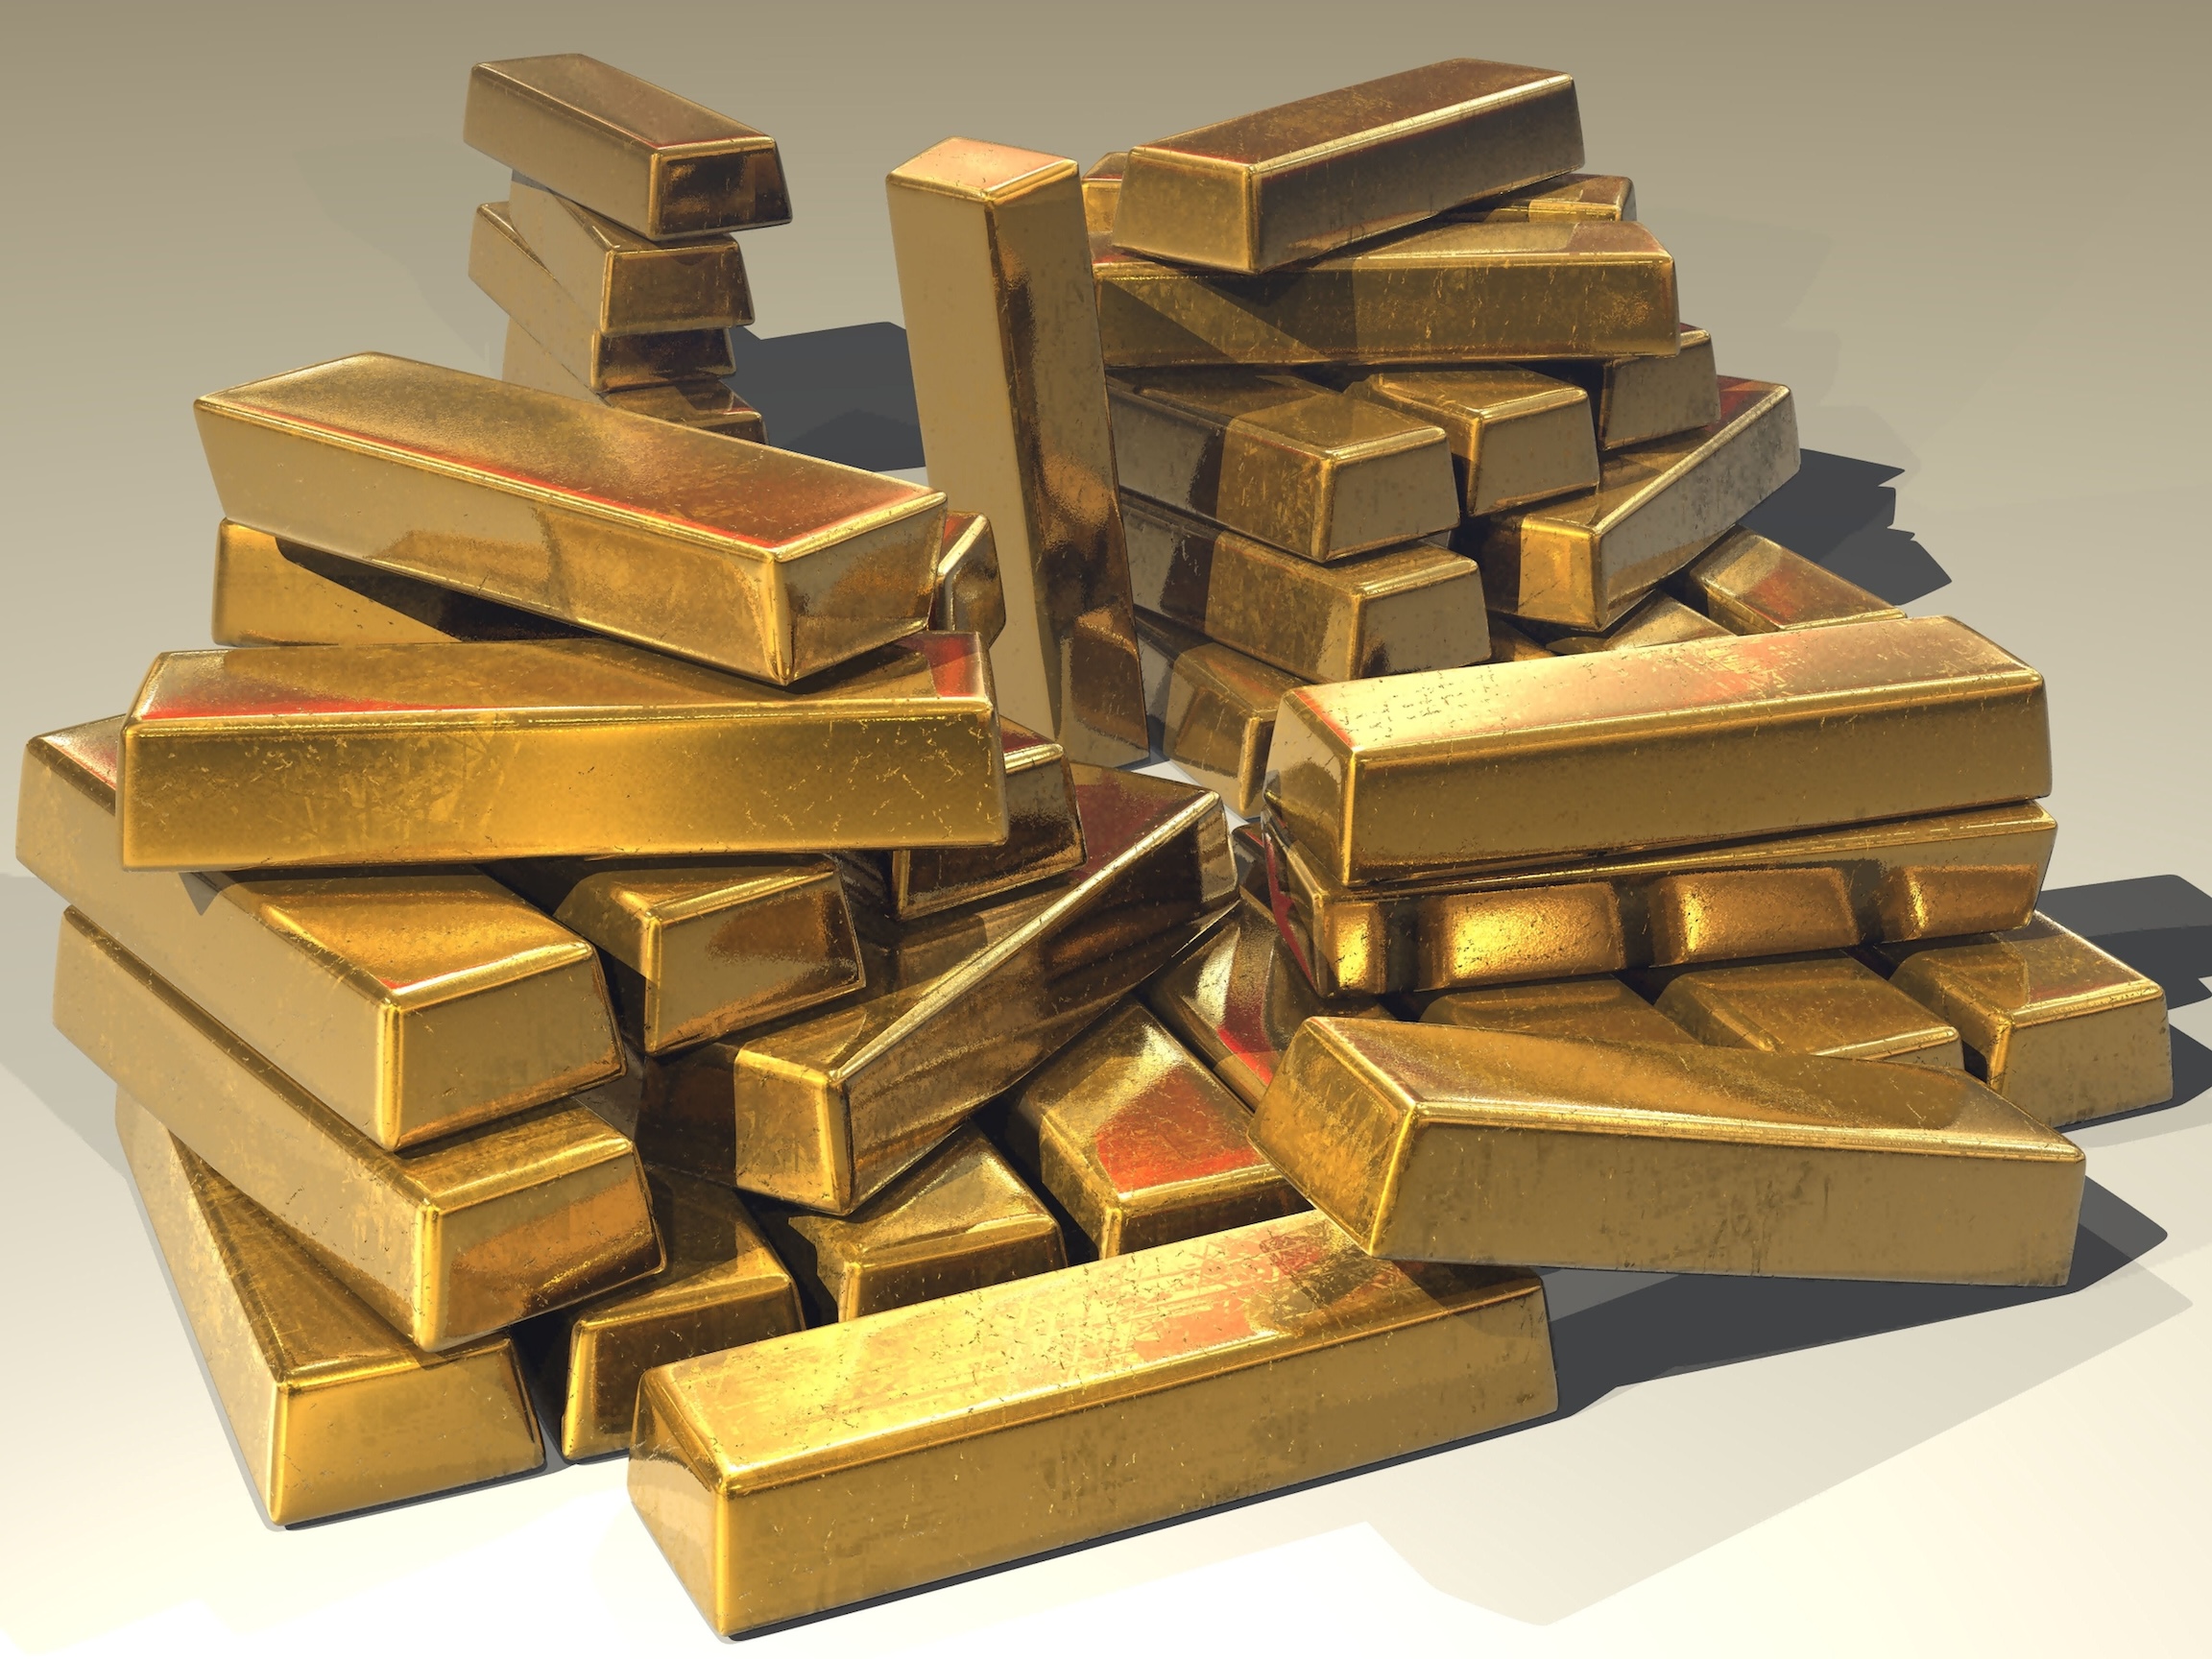 A large pile of golden bars on a white background